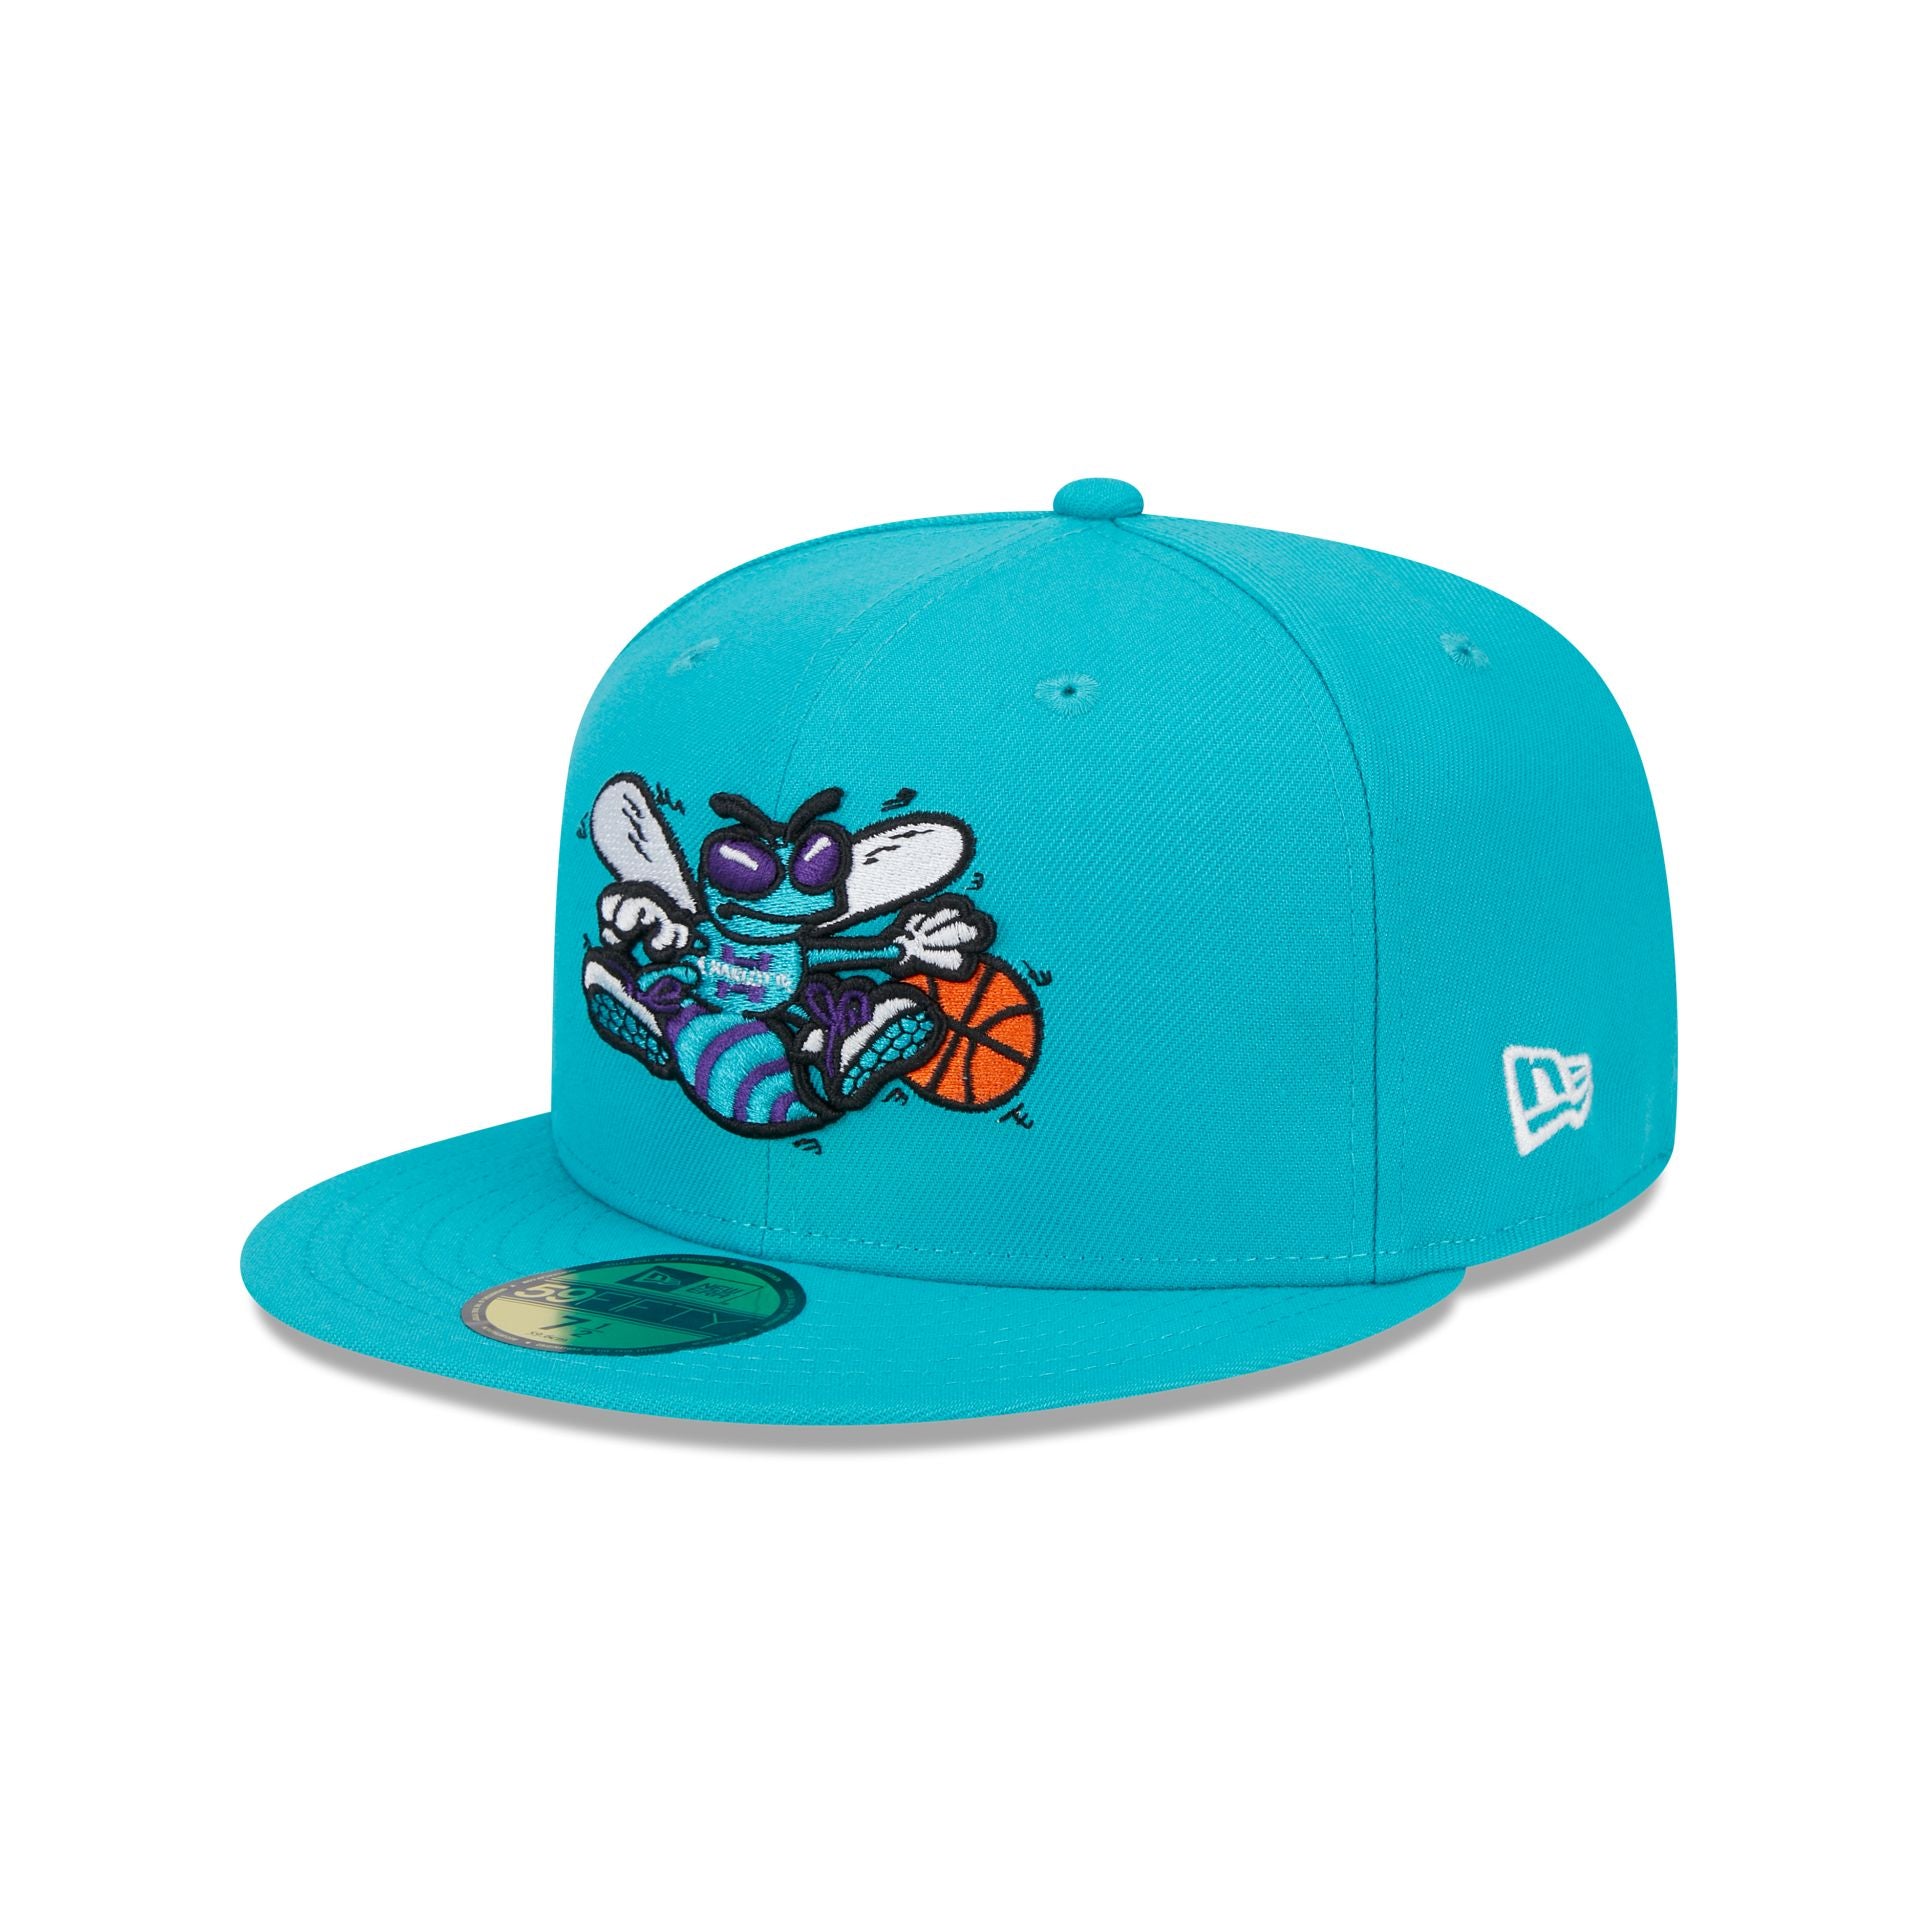 Charlotte Hornets Classic Edition Blue 59FIFTY Fitted